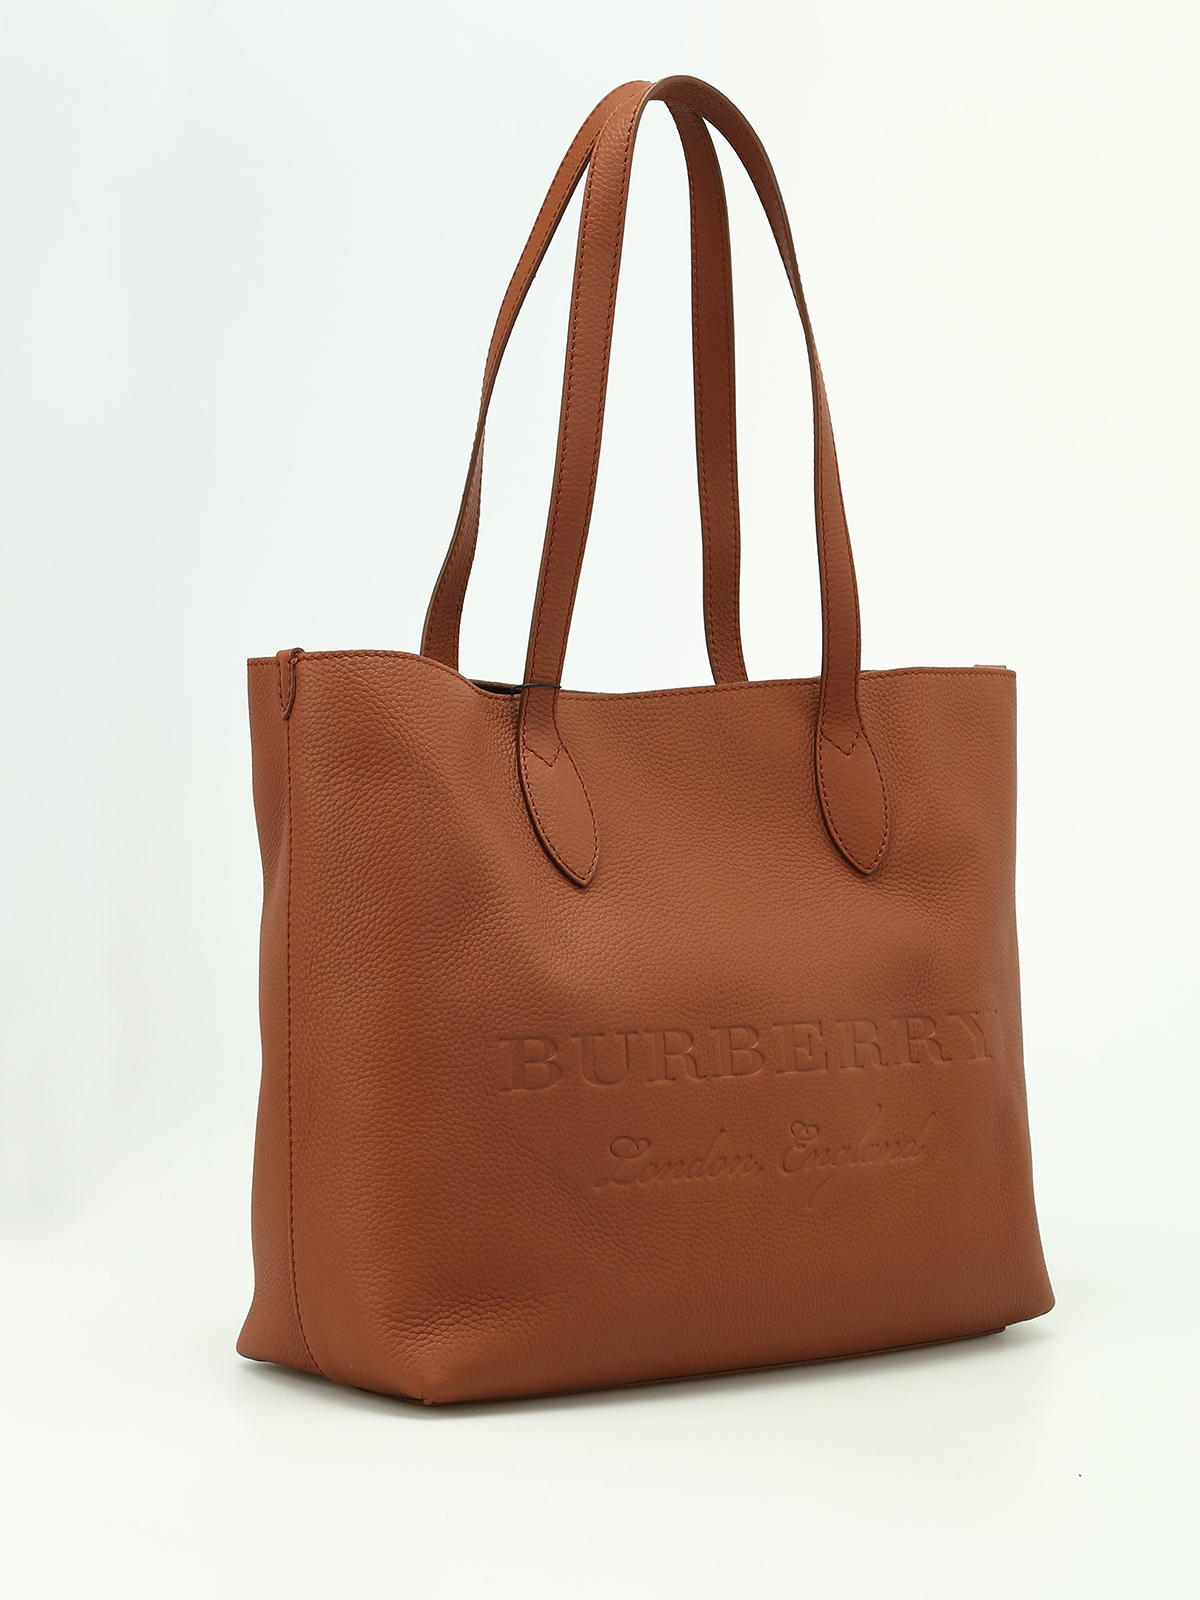 Burberry - Remington brown leather large tote - totes bags - 4060092